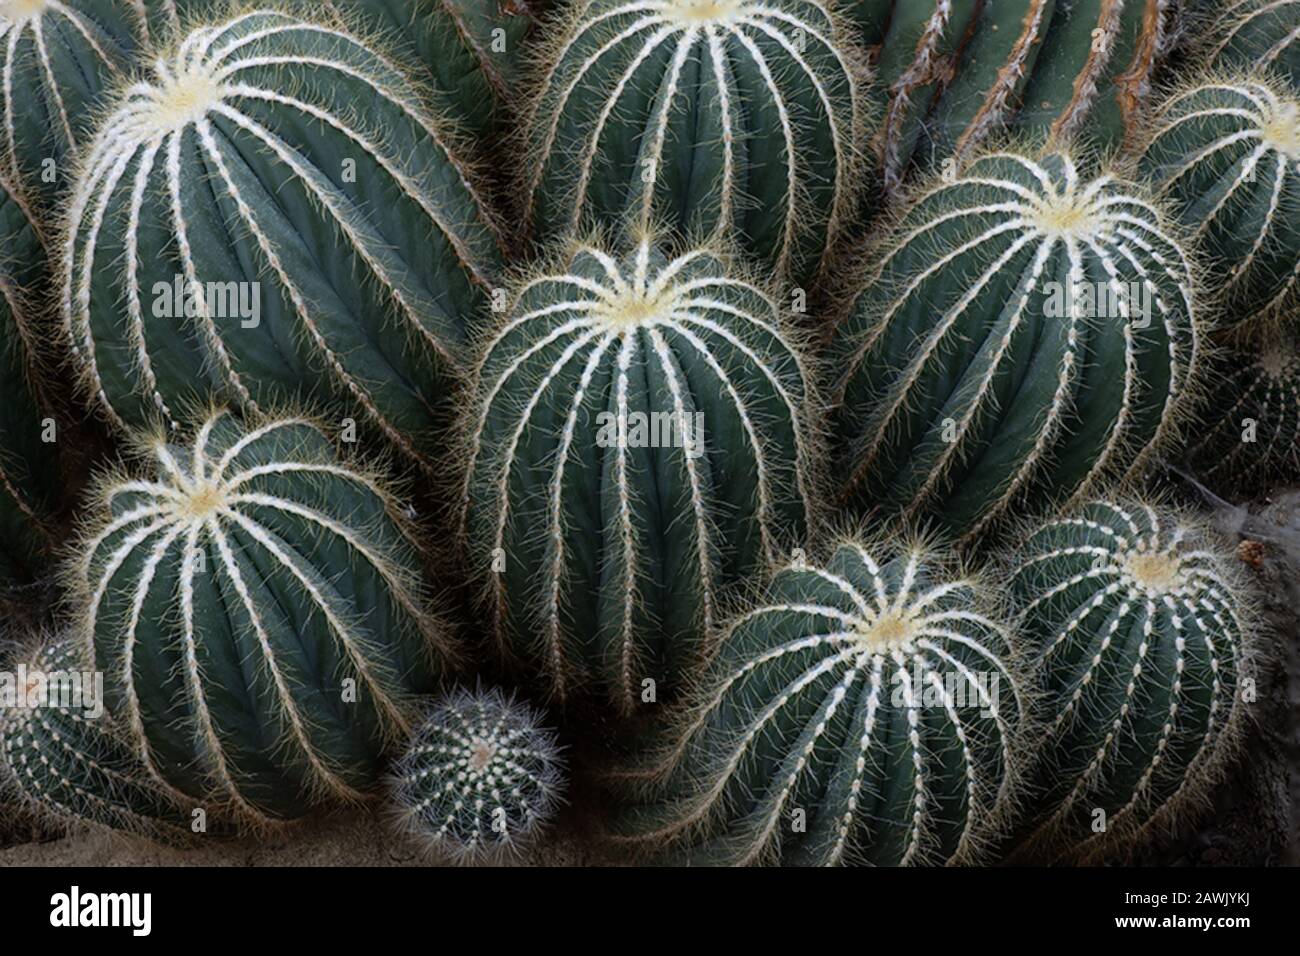 Interesting pattern fomed by the Parodia Magnifica cactus Stock Photo